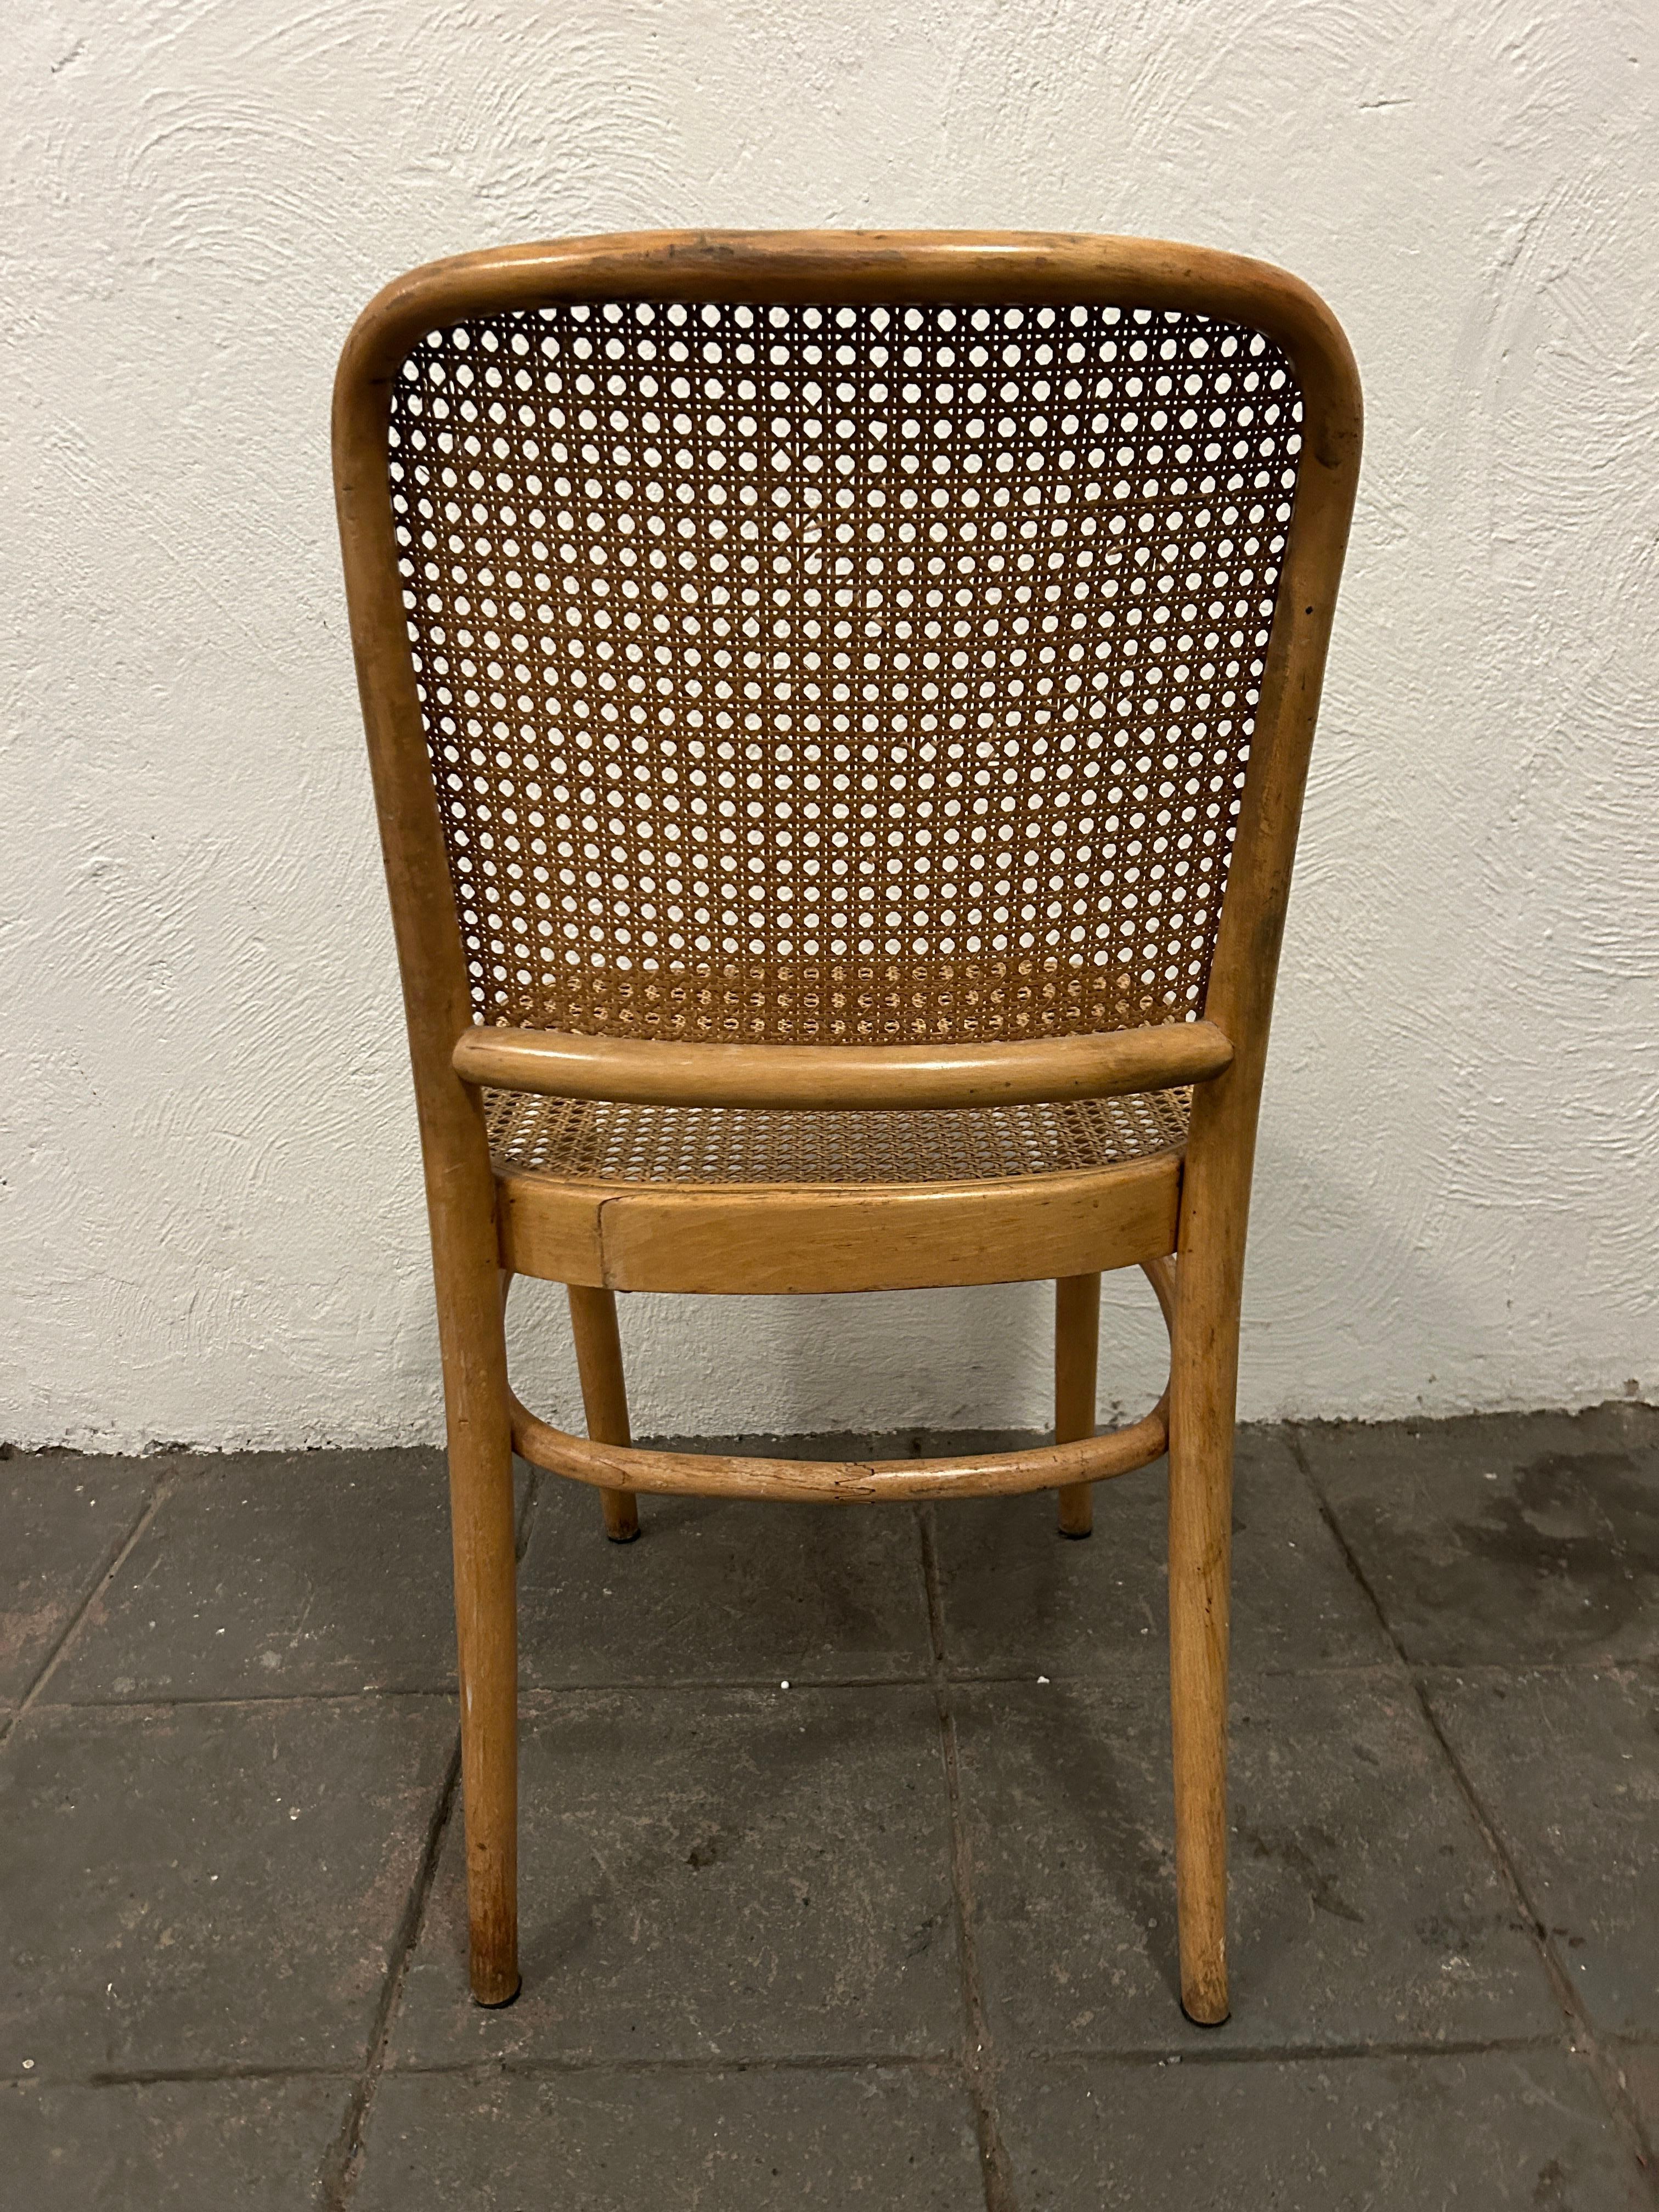 Italian Mid Century Vintage Birch Cane Dining Chair by Josef Hoffman 8 Available For Sale